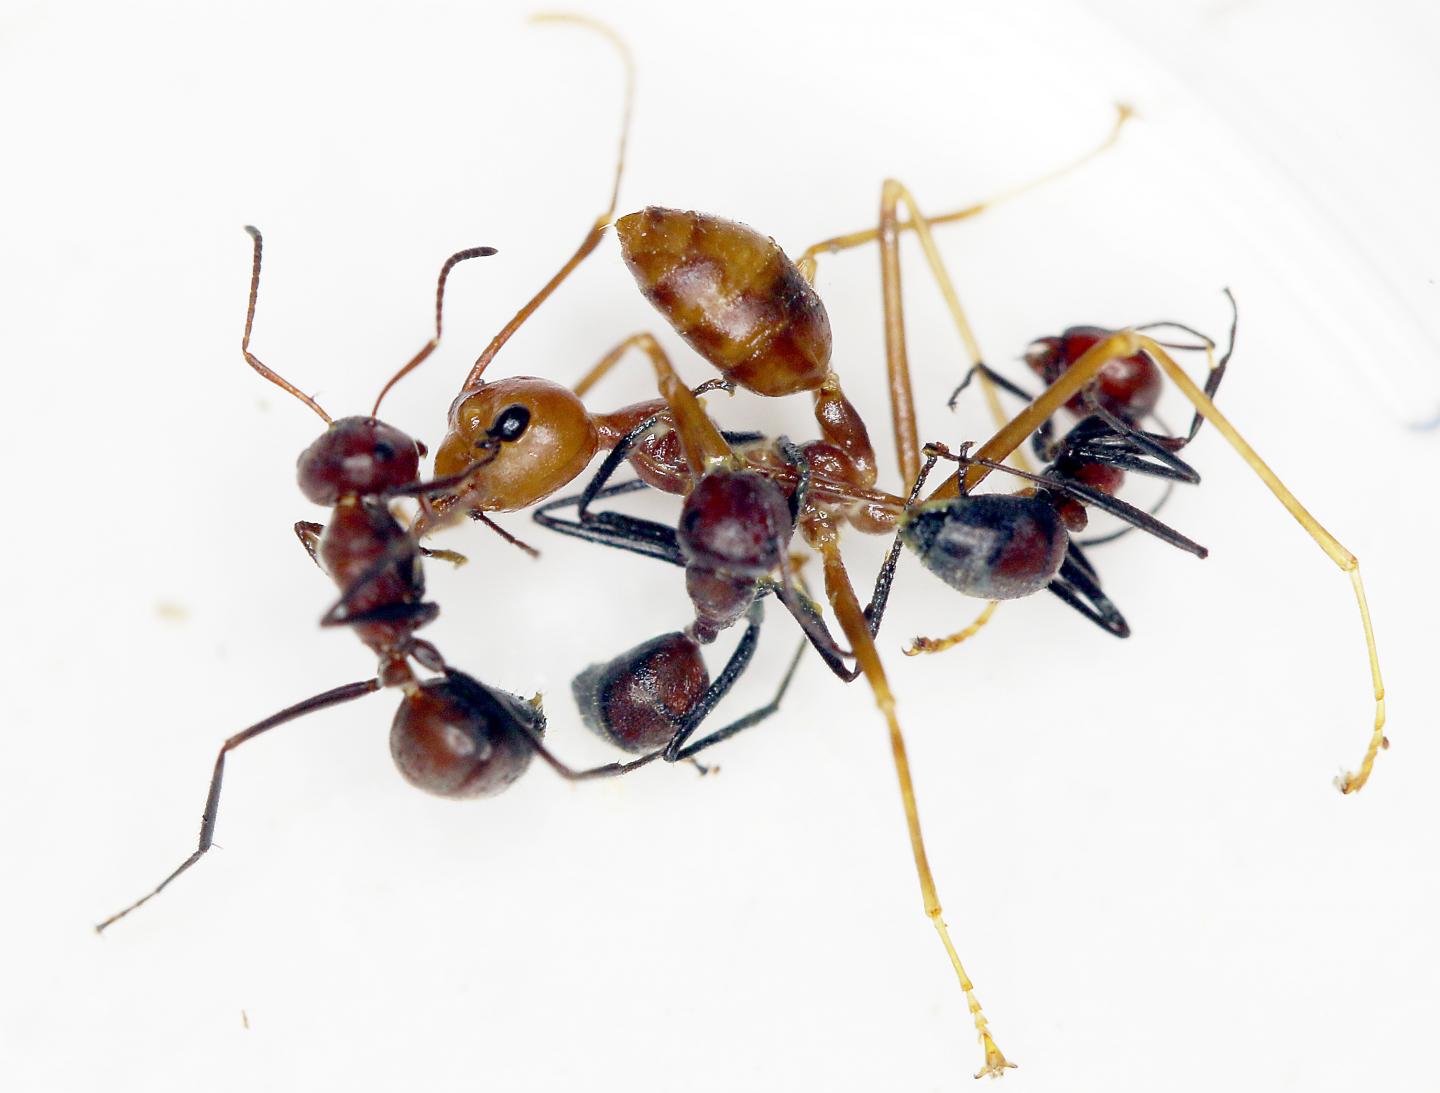 New Species Of ‘Exploding Ant’ Discovered In Borneo